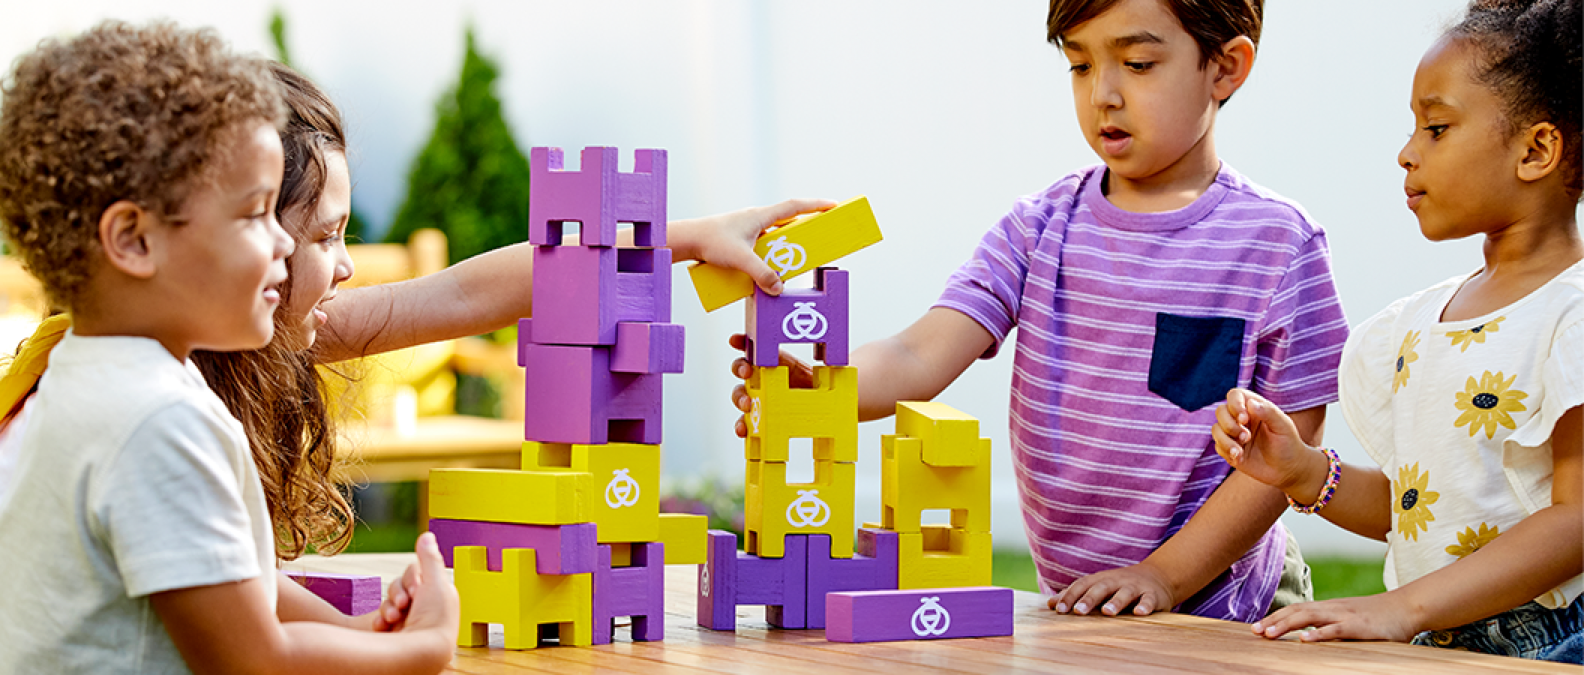 Children playing with purple and yellow building blocks together